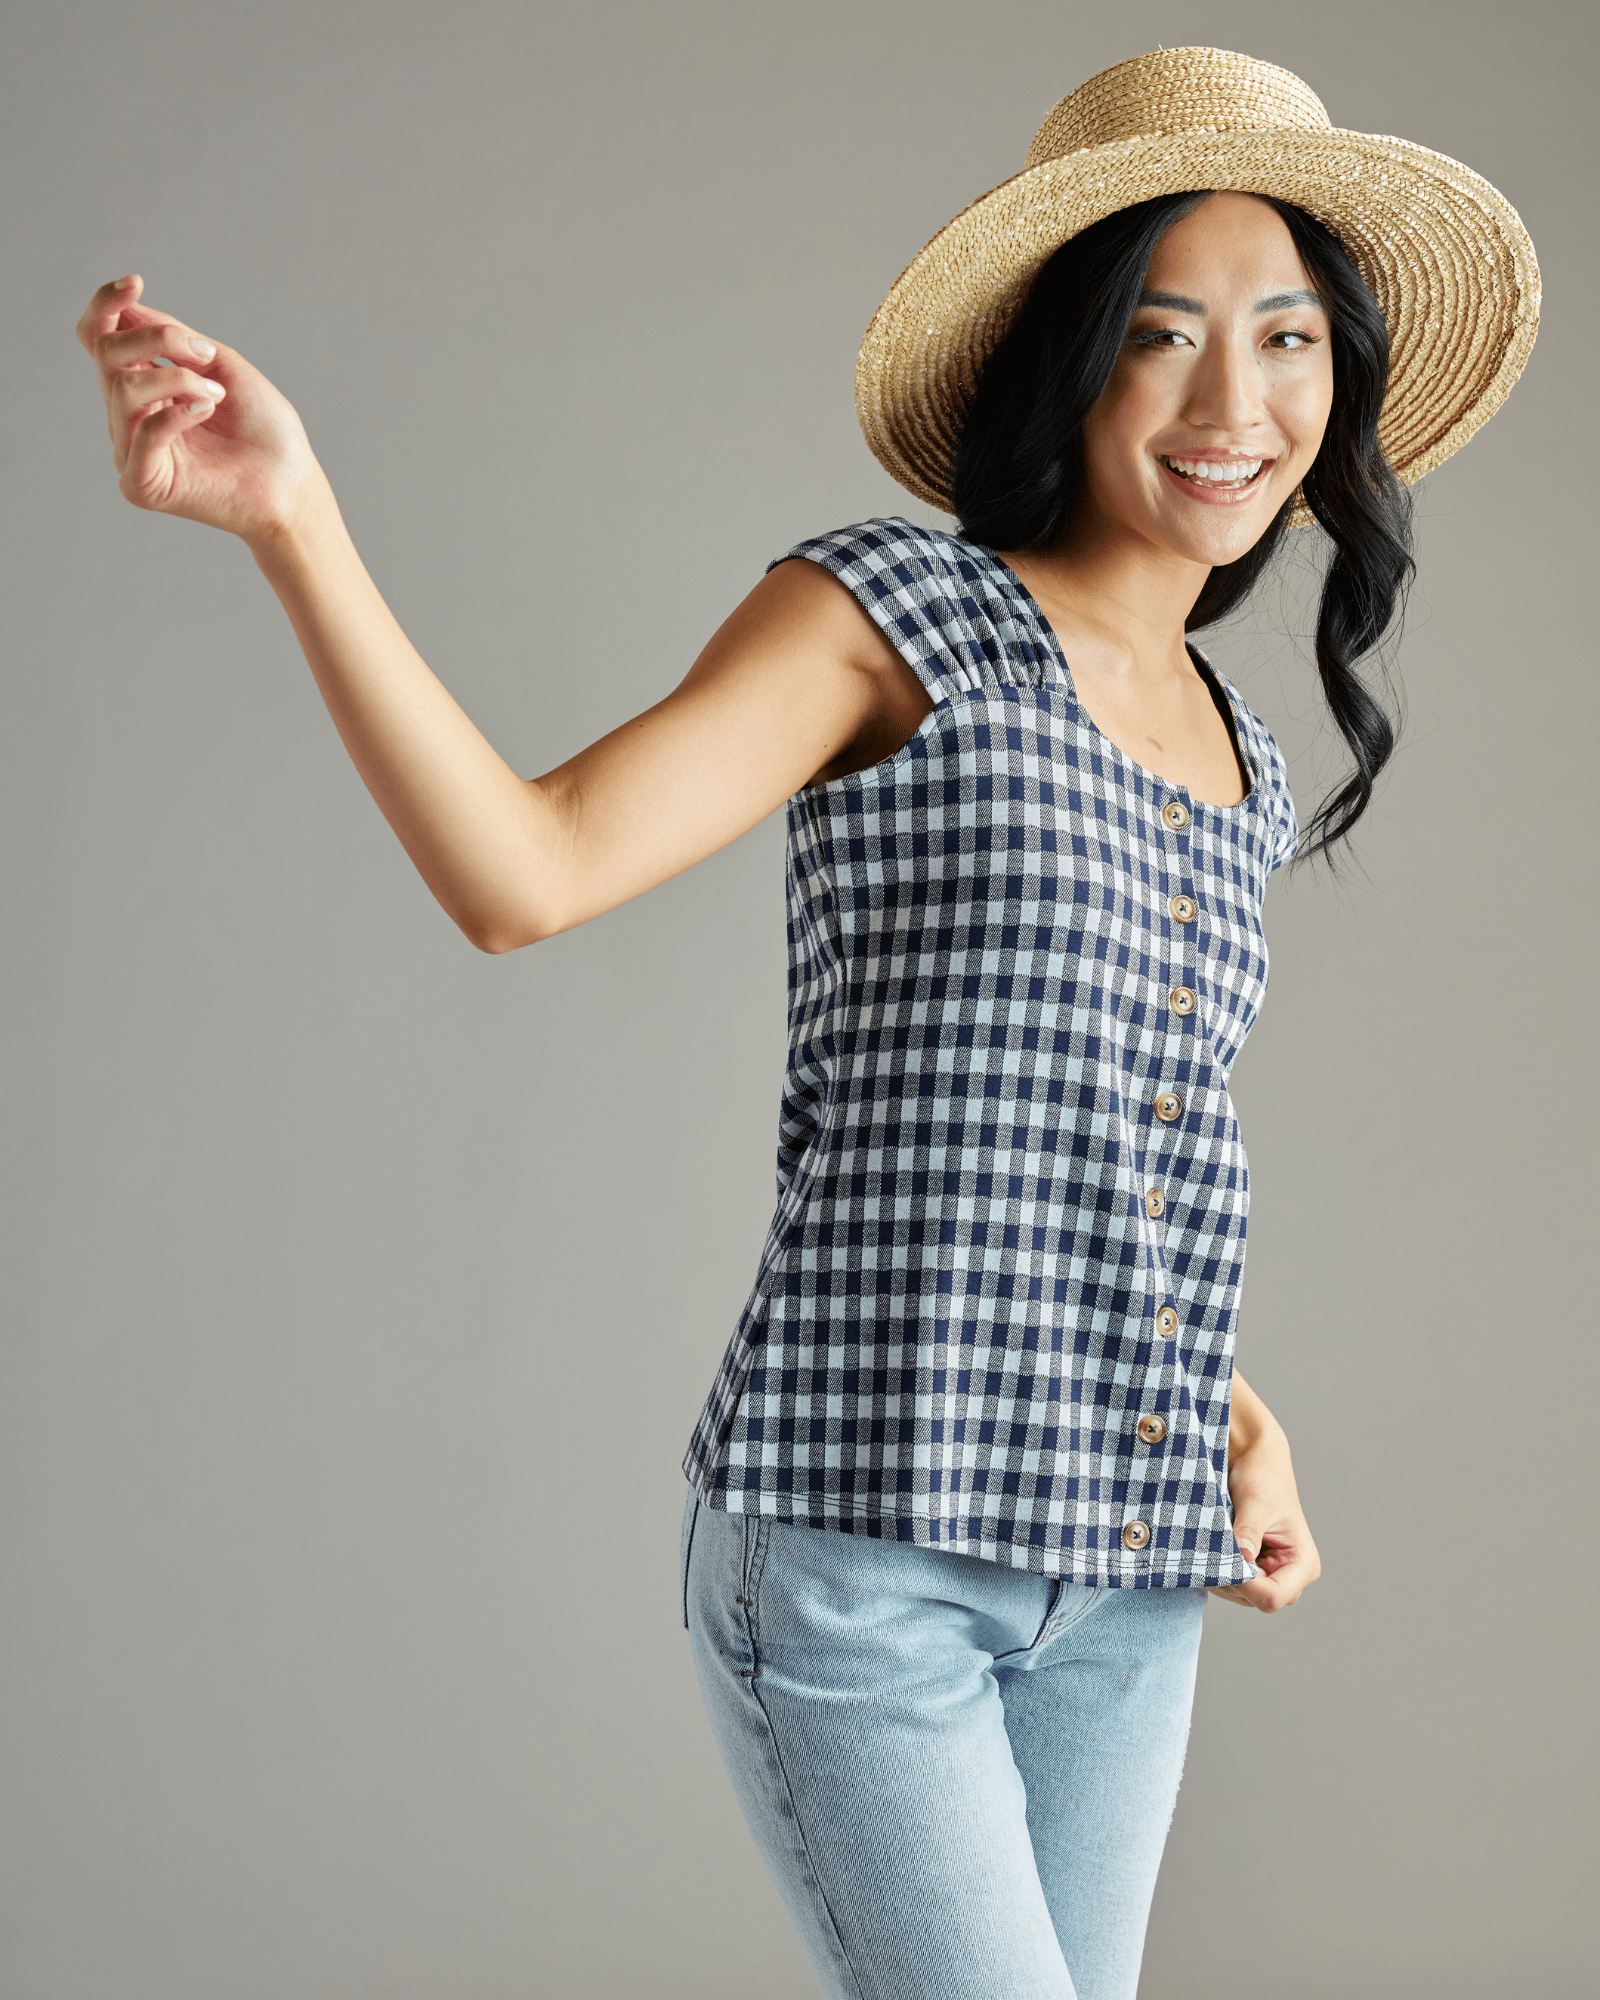 Woman in a navy and white gingham blouse with short sleeves and buttons down the front